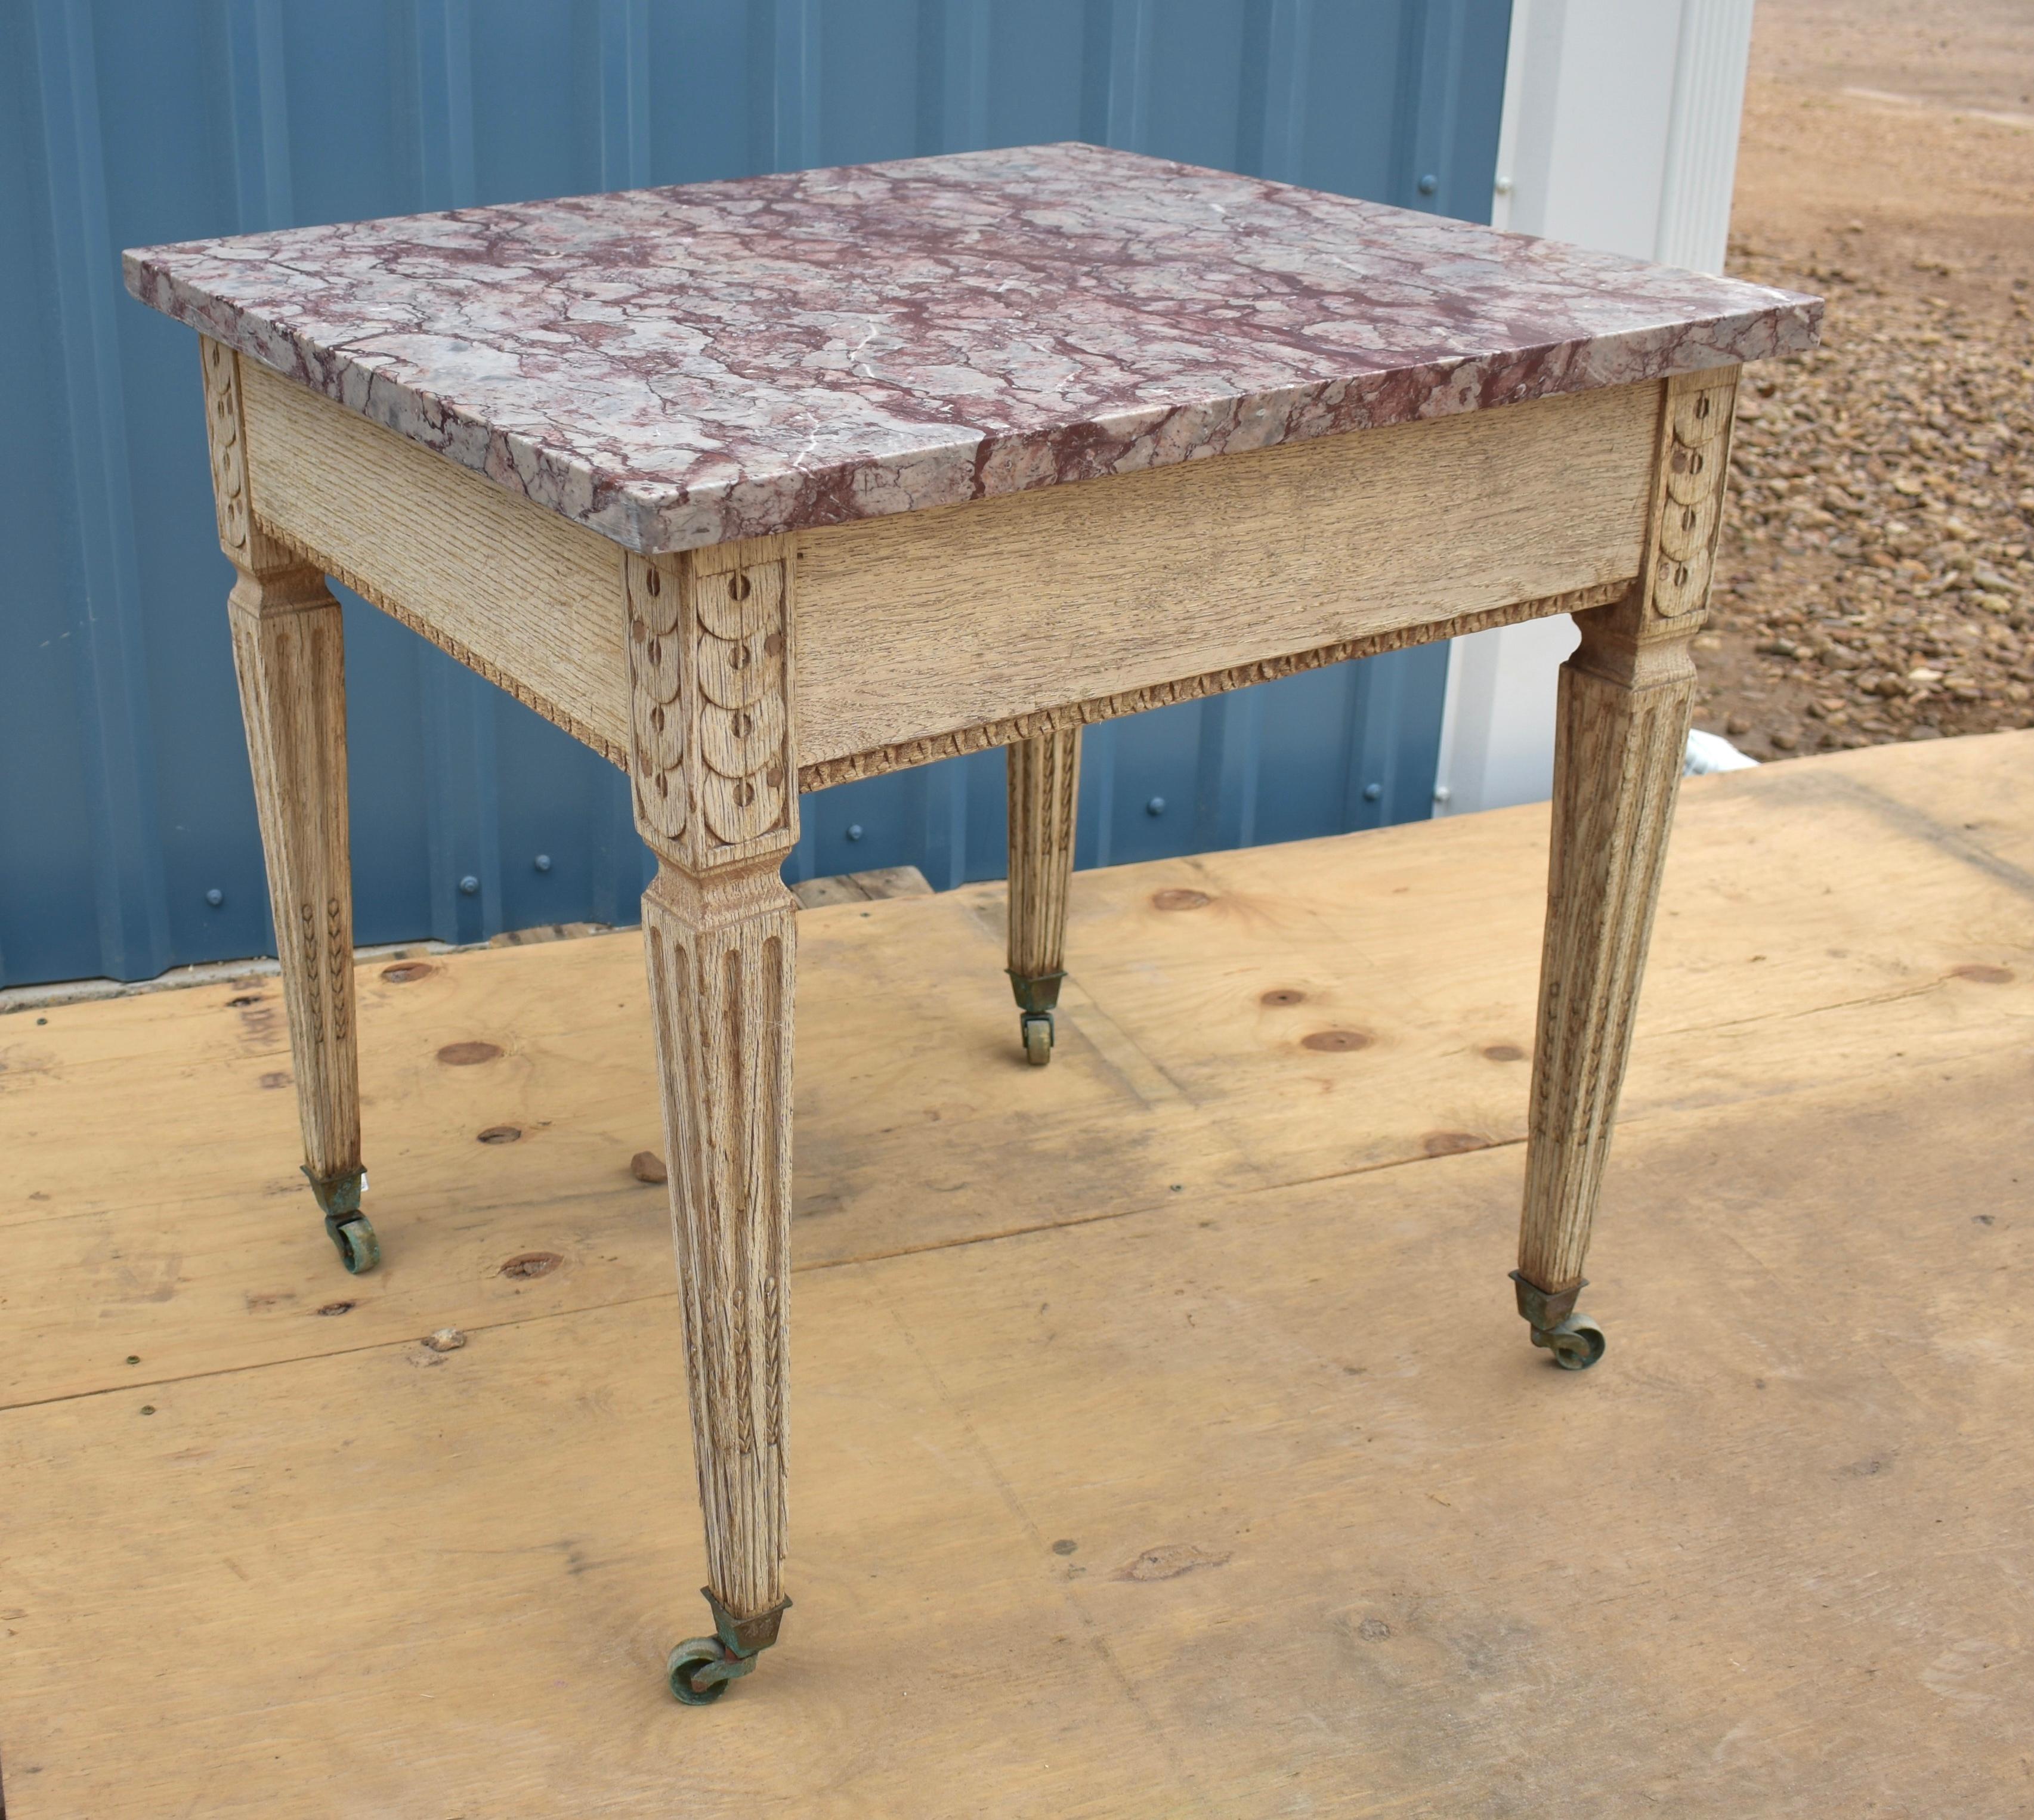 This is a beautifully hand-carved and hand-made Louis XVI side table built using oak in the late 1700s. Amazingly the table still sits on its original casters, however, the marble was replaced sometime in the mid 20th century. When looking at this